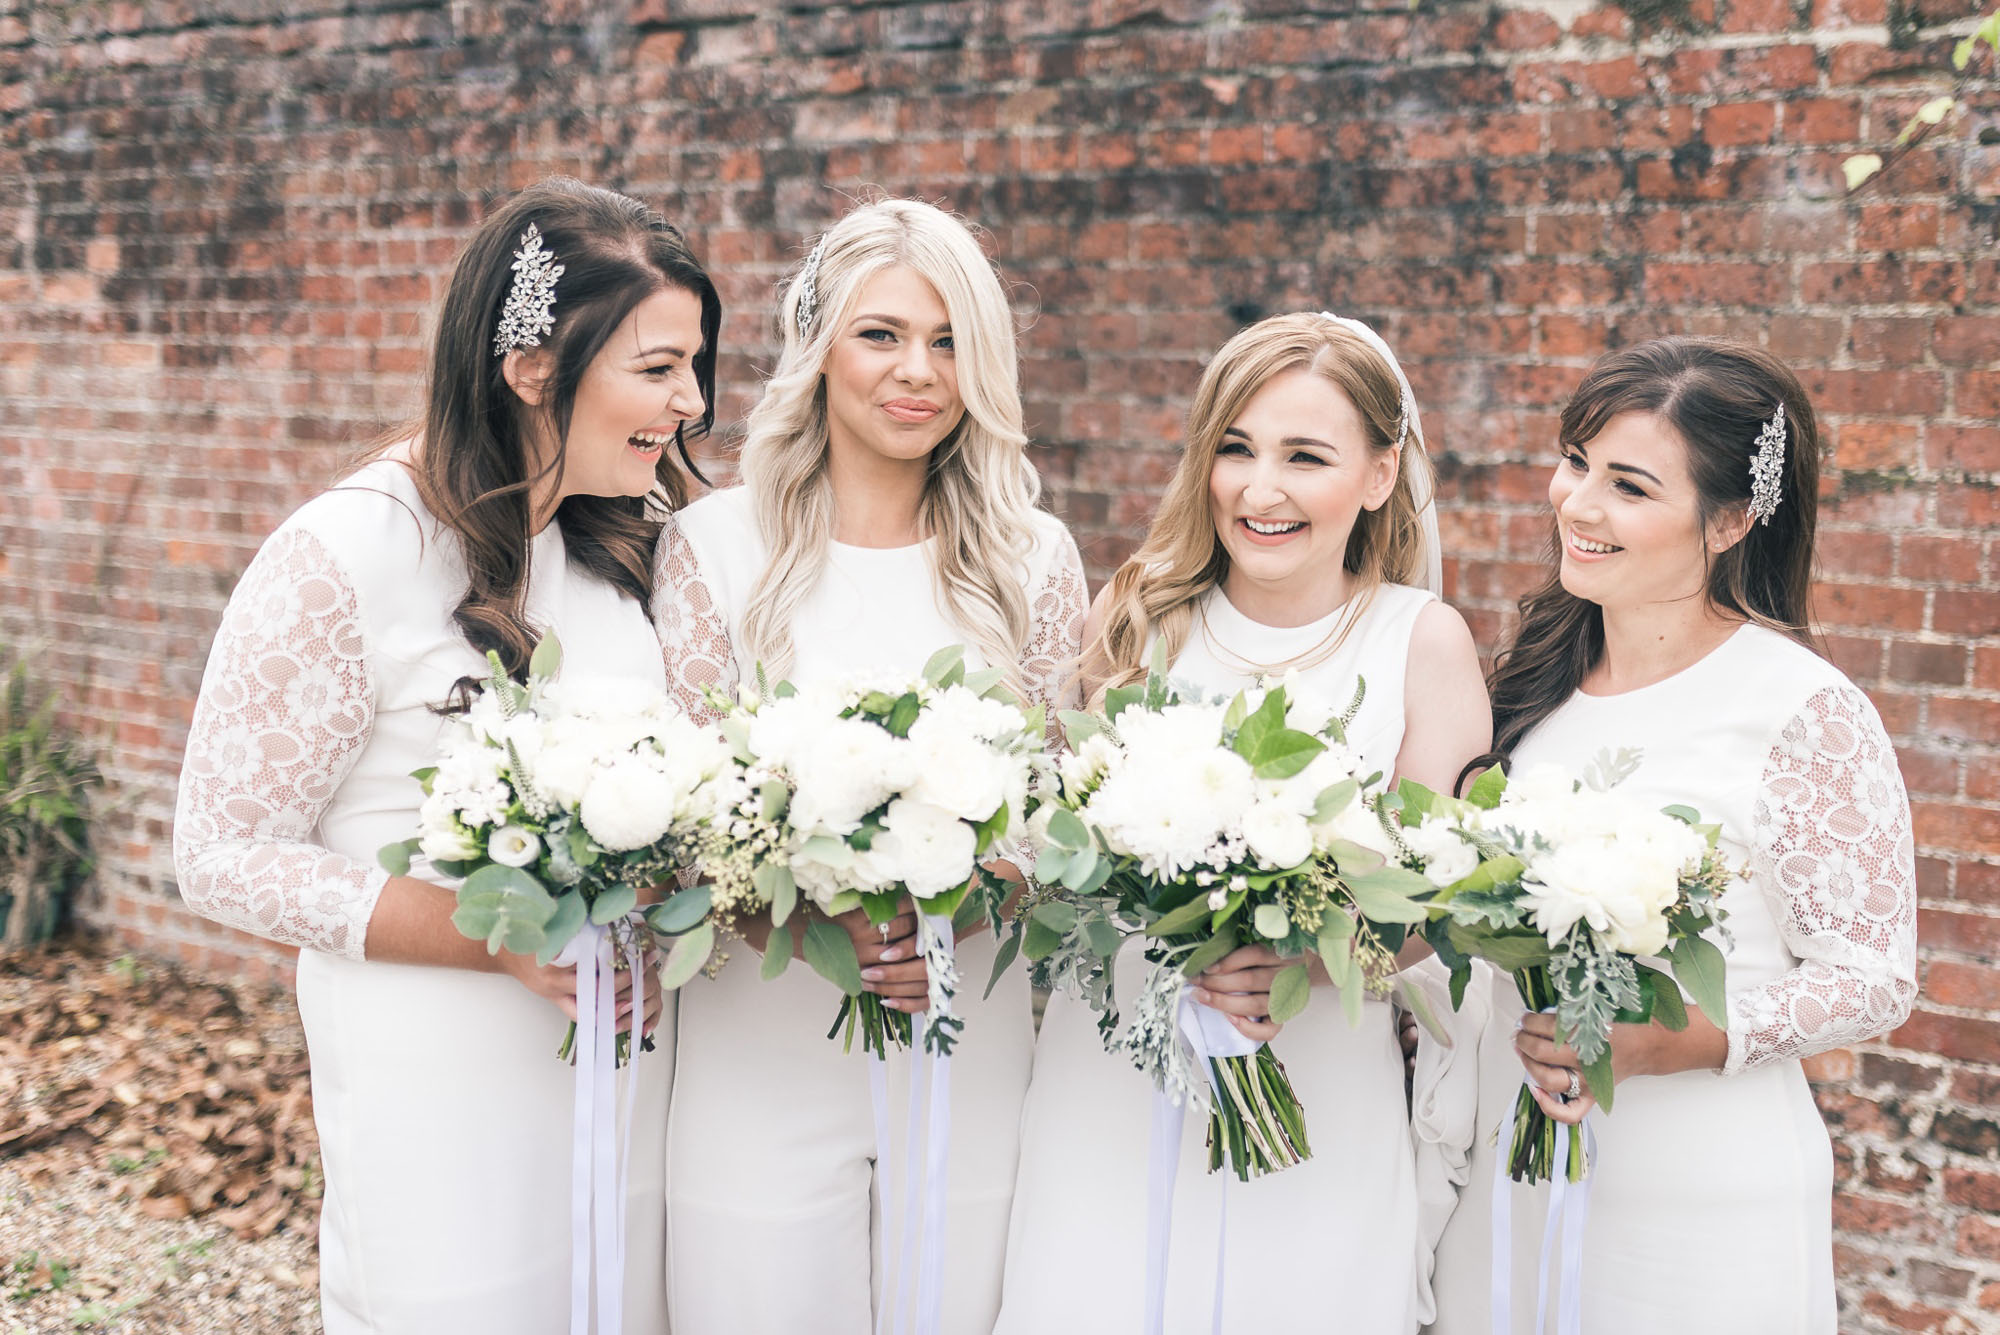 Bridesmaids holding white bouquets with green foliage. By Howling Basset Photography